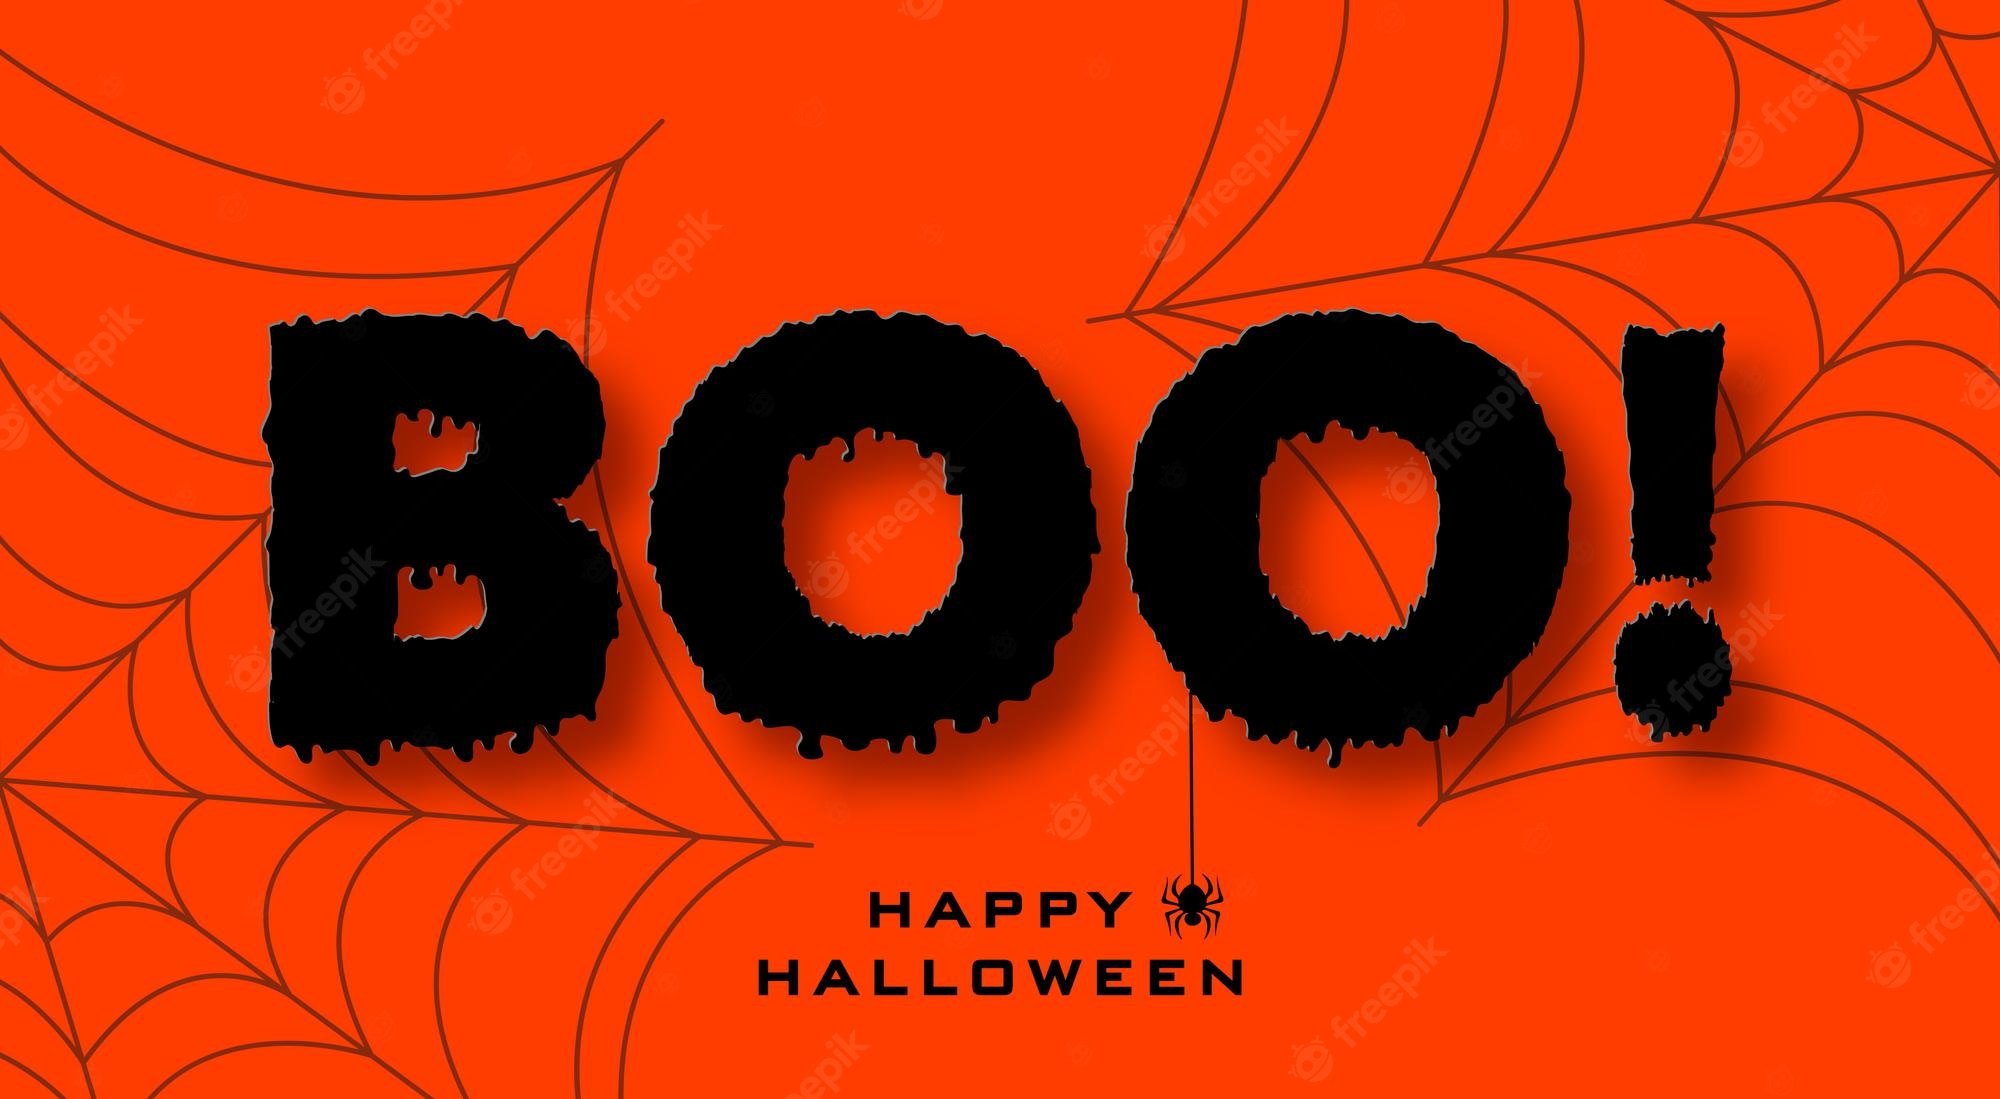 Premium Vector. Halloween banner in paper cut style black text on orange background with cobwebs and spider